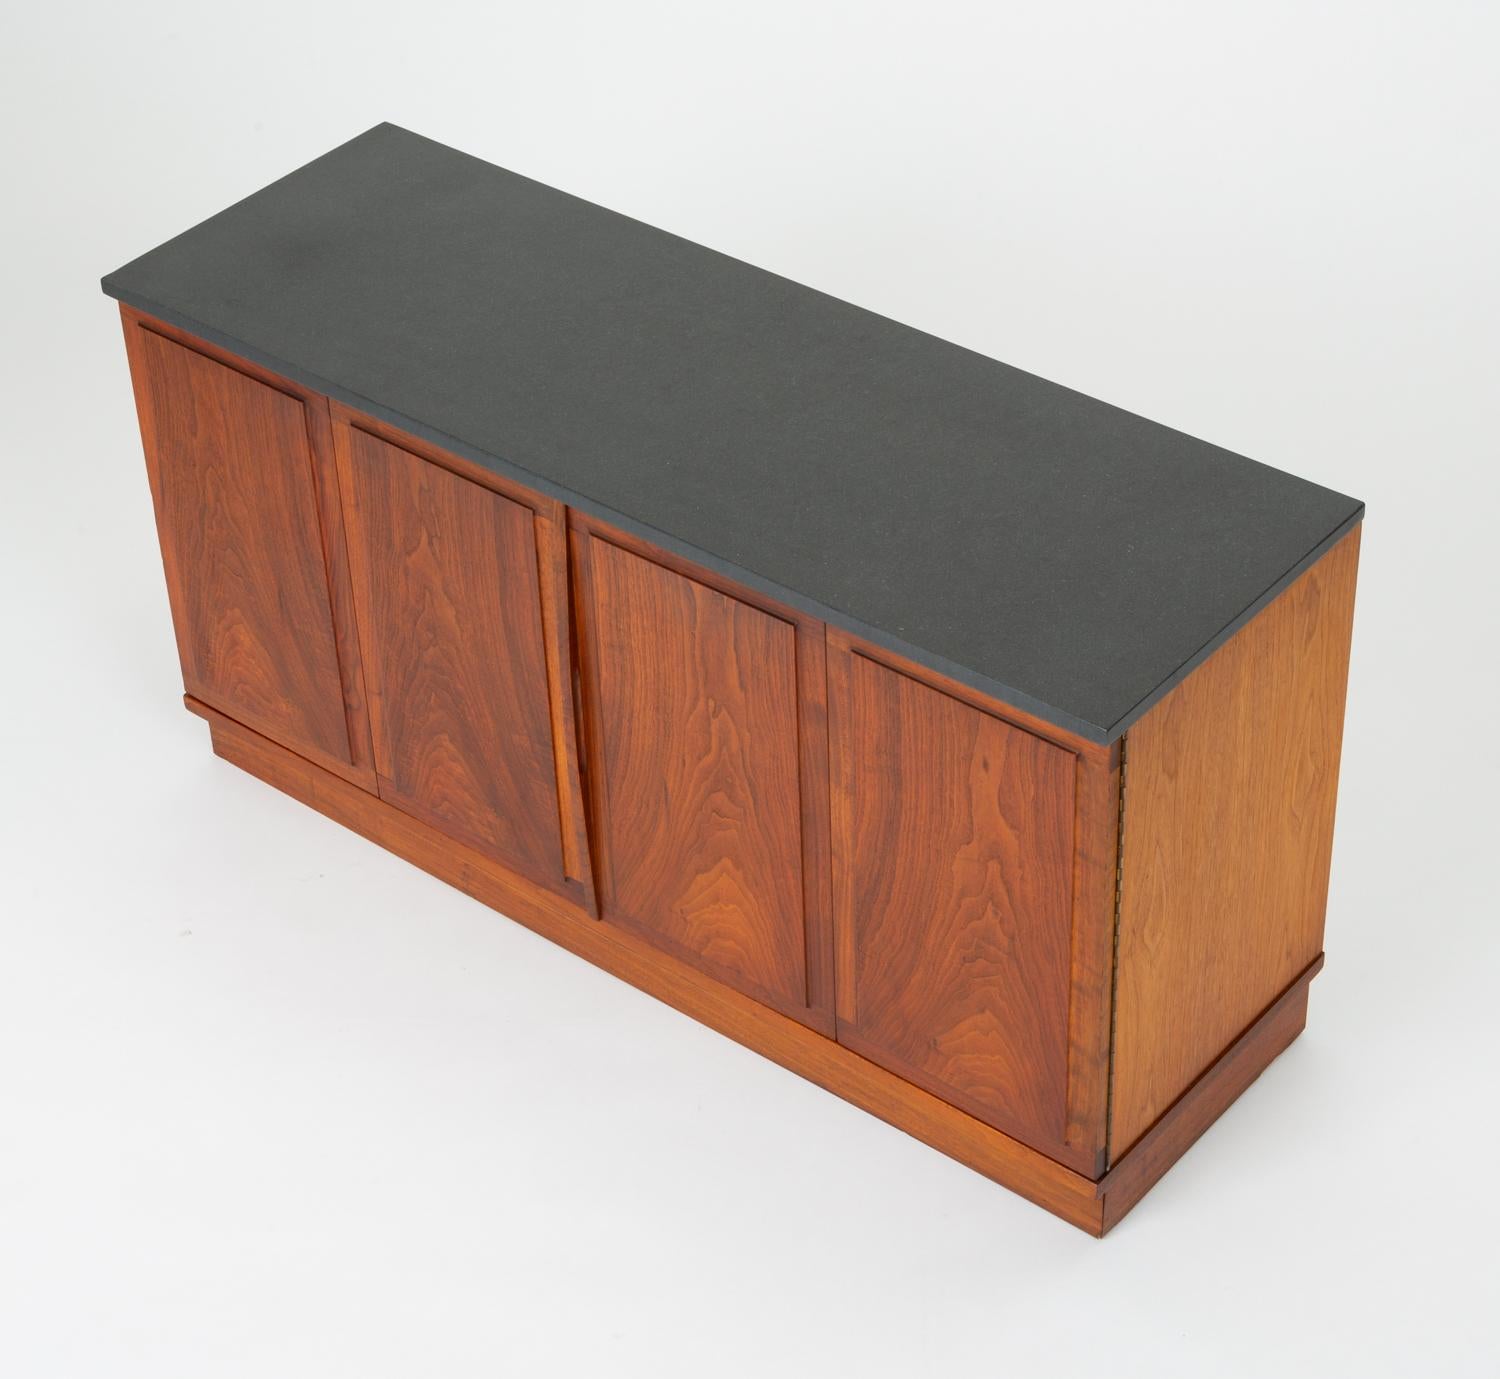 20th Century Slate-Top Walnut Sideboard by Jack Cartwright for Founders